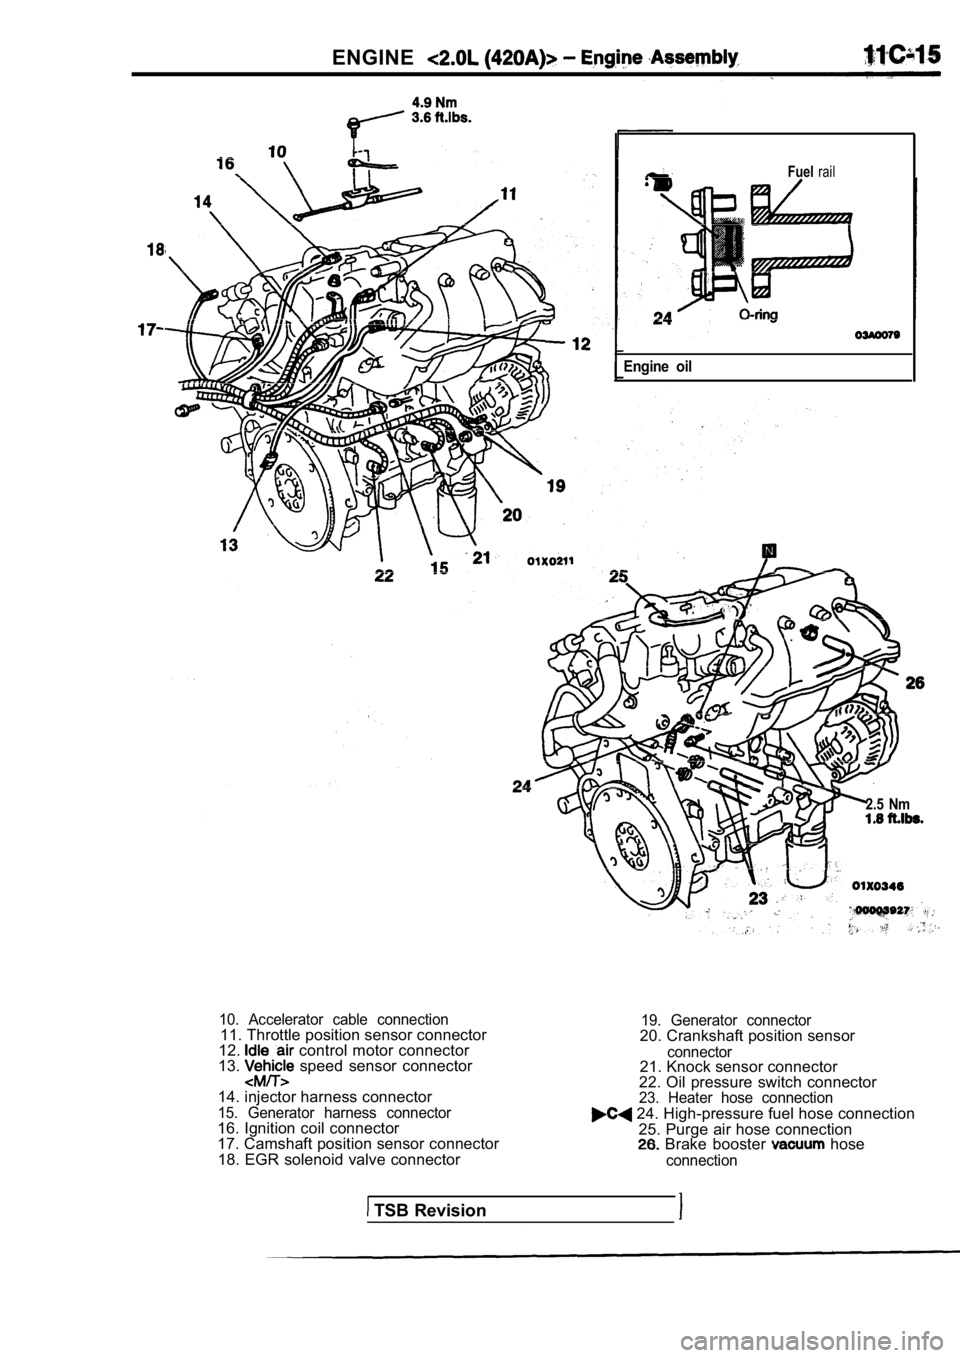 MITSUBISHI SPYDER 1990  Service Repair Manual ENGINE
Fuelrail
Engine  oil
2.5  Nm
10.  Accelerator  cable  connection11. Throttle position sensor connector
12. control motor connector
13.  speed  sensor  connector
14. injector harness connector
1